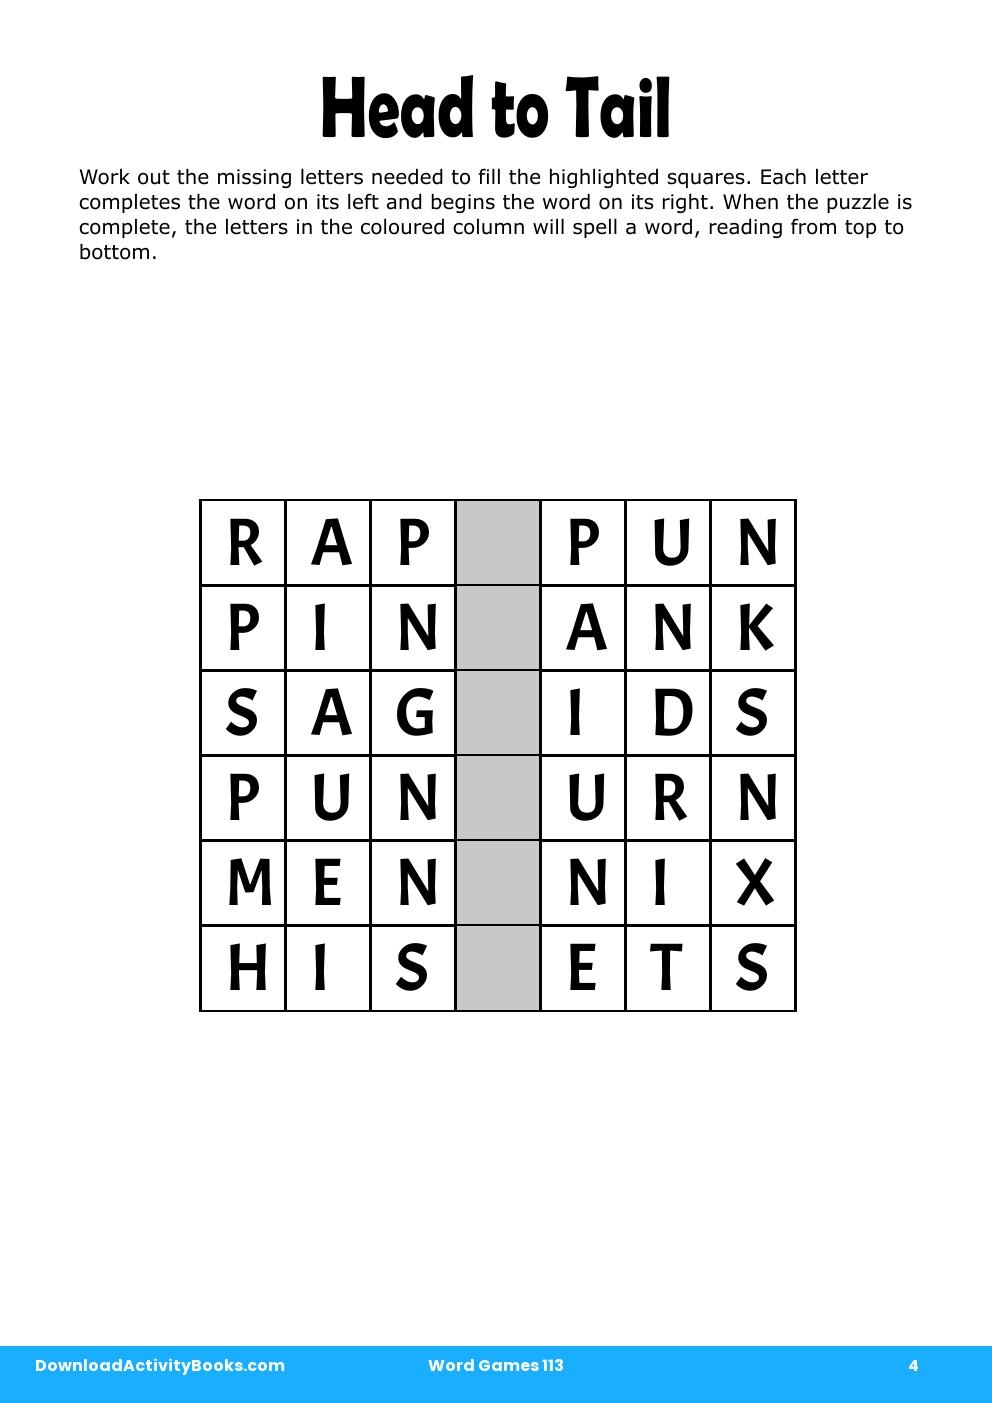 Head to Tail in Word Games 113